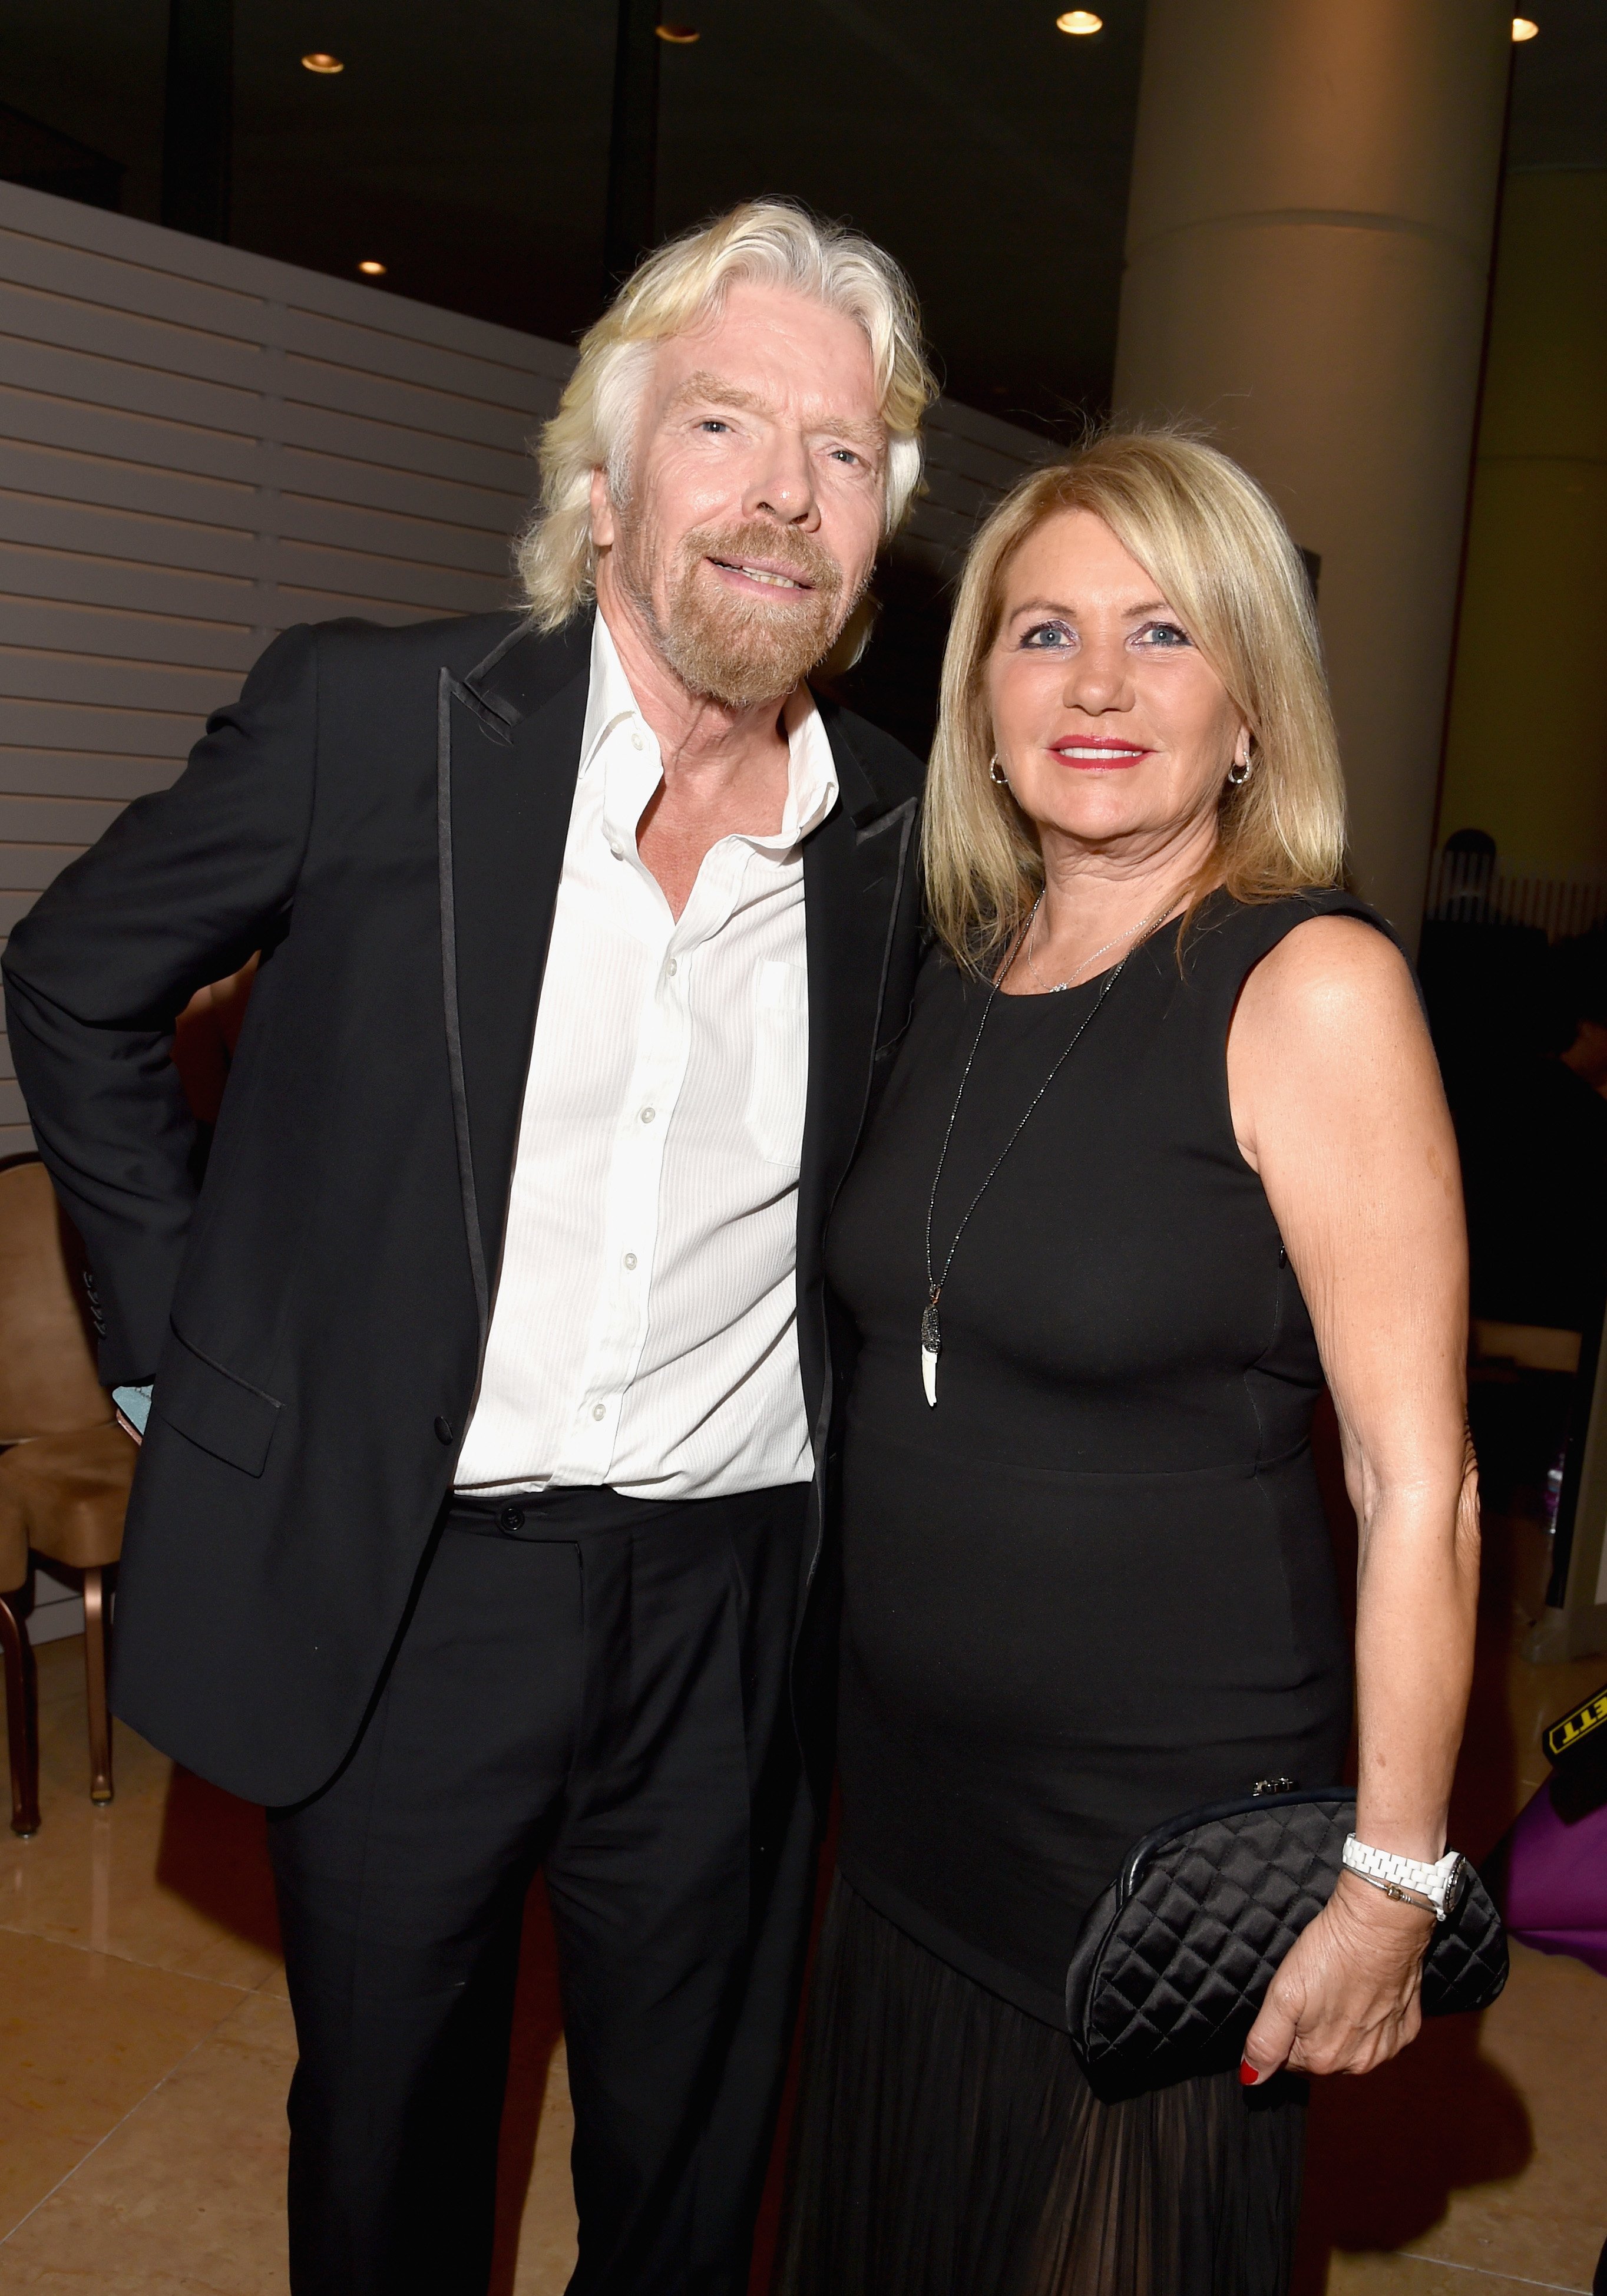 Richard Branson and Joan Templeman attend the 2016 Pre-GRAMMY Gala and Salute to Industry Icons honoring Irving Azoff on February 14, 2016, in Beverly Hills, California. | Source: Getty Images